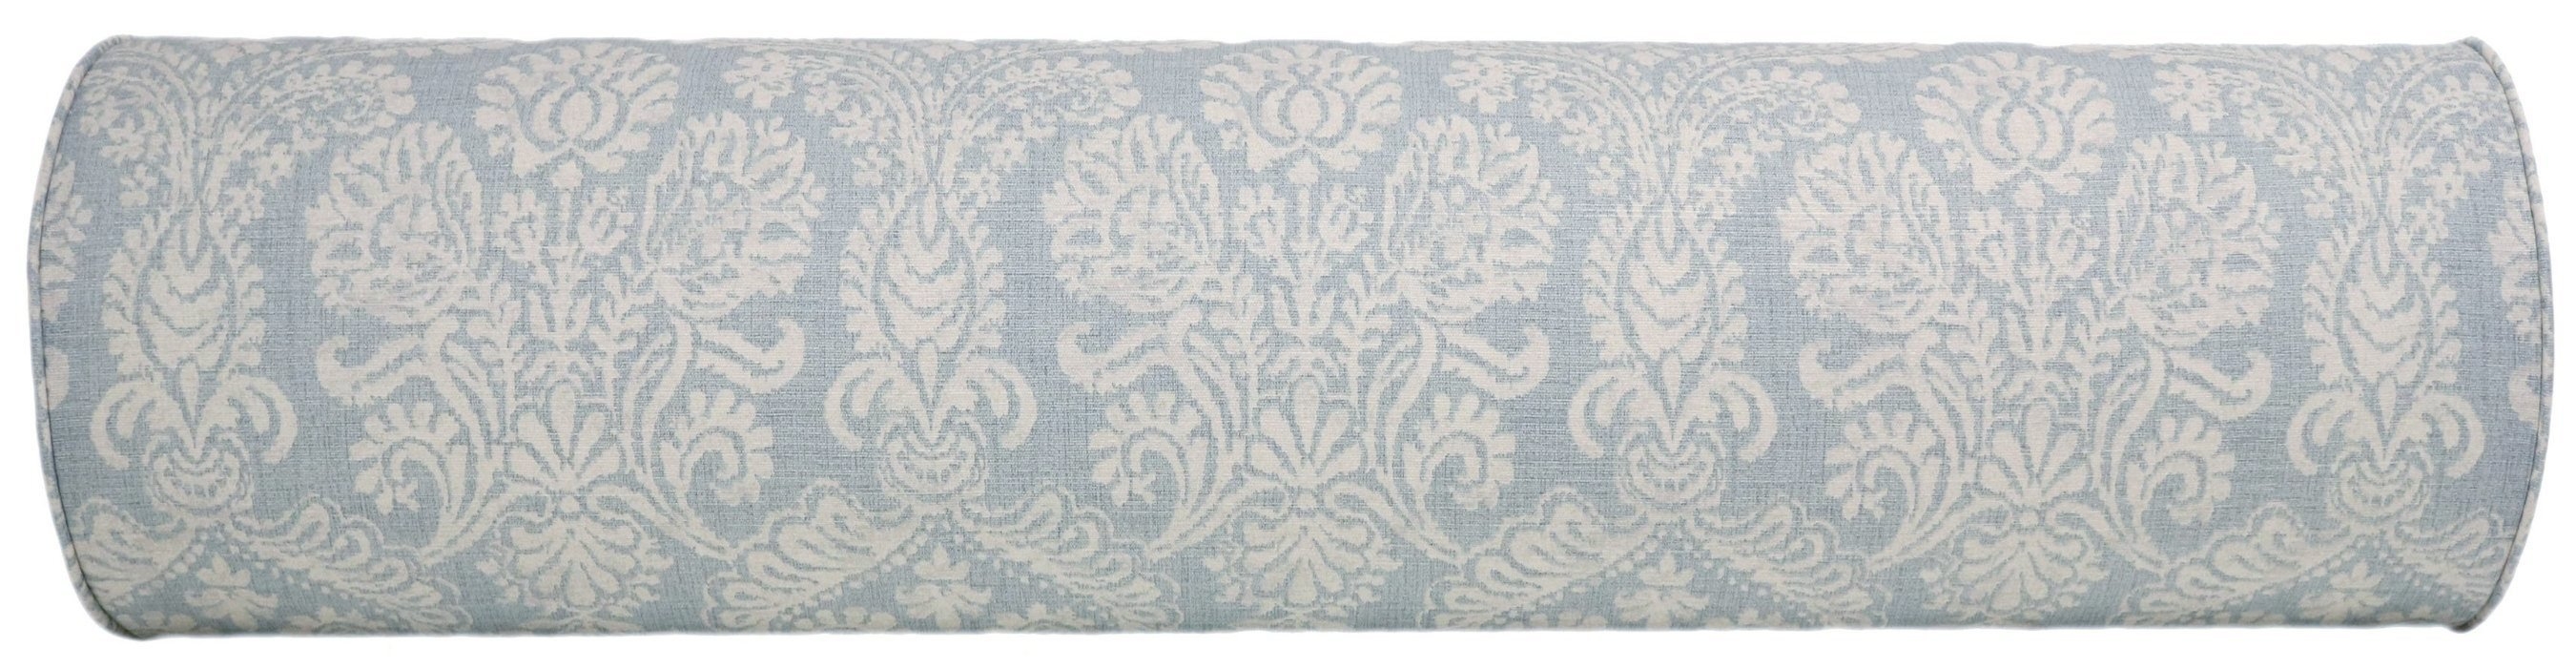 The Bolster :: French Damask Print // Sky Blue - KING // 9" X 48" - Image 1